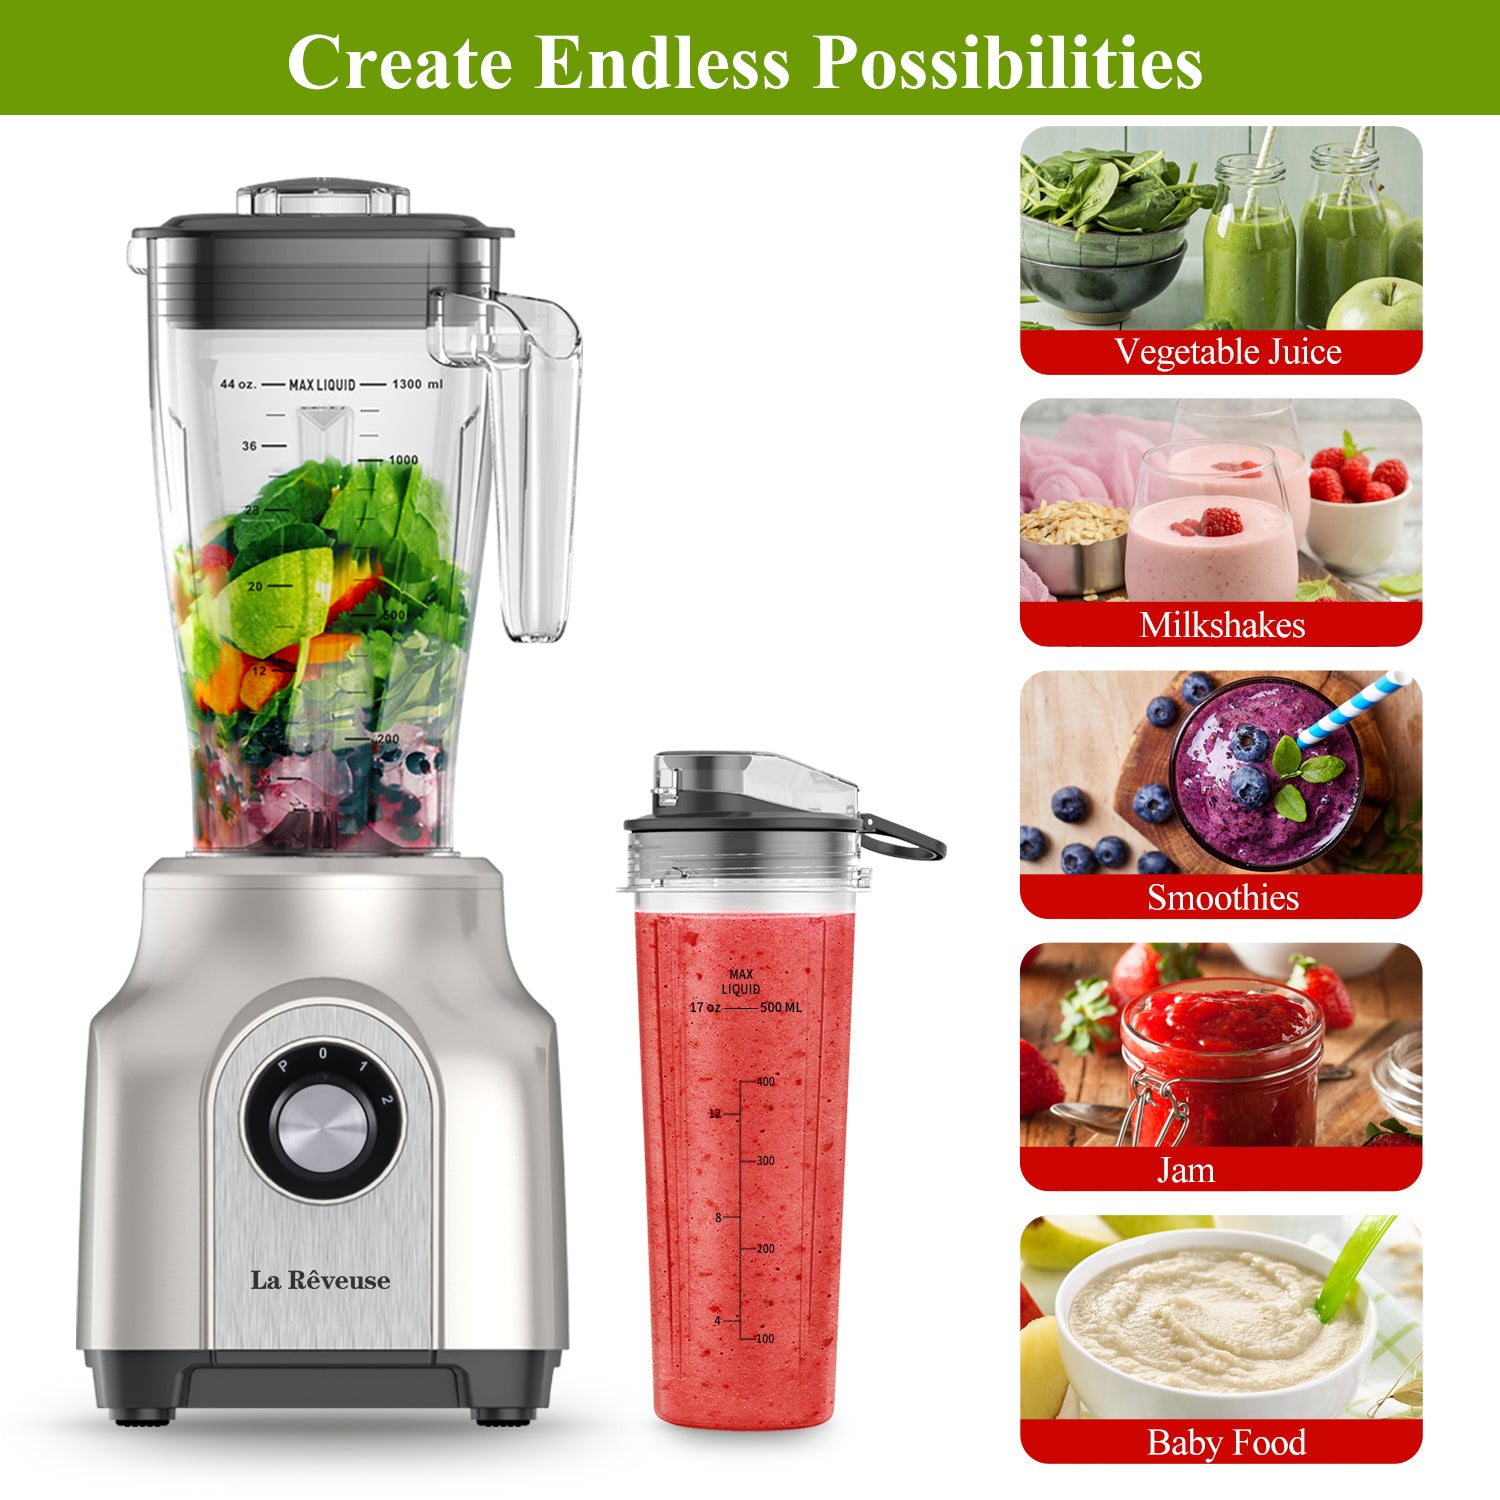 La Reveuse Professional Countertop High Speed Blender with 1200 Watts Base-51 oz